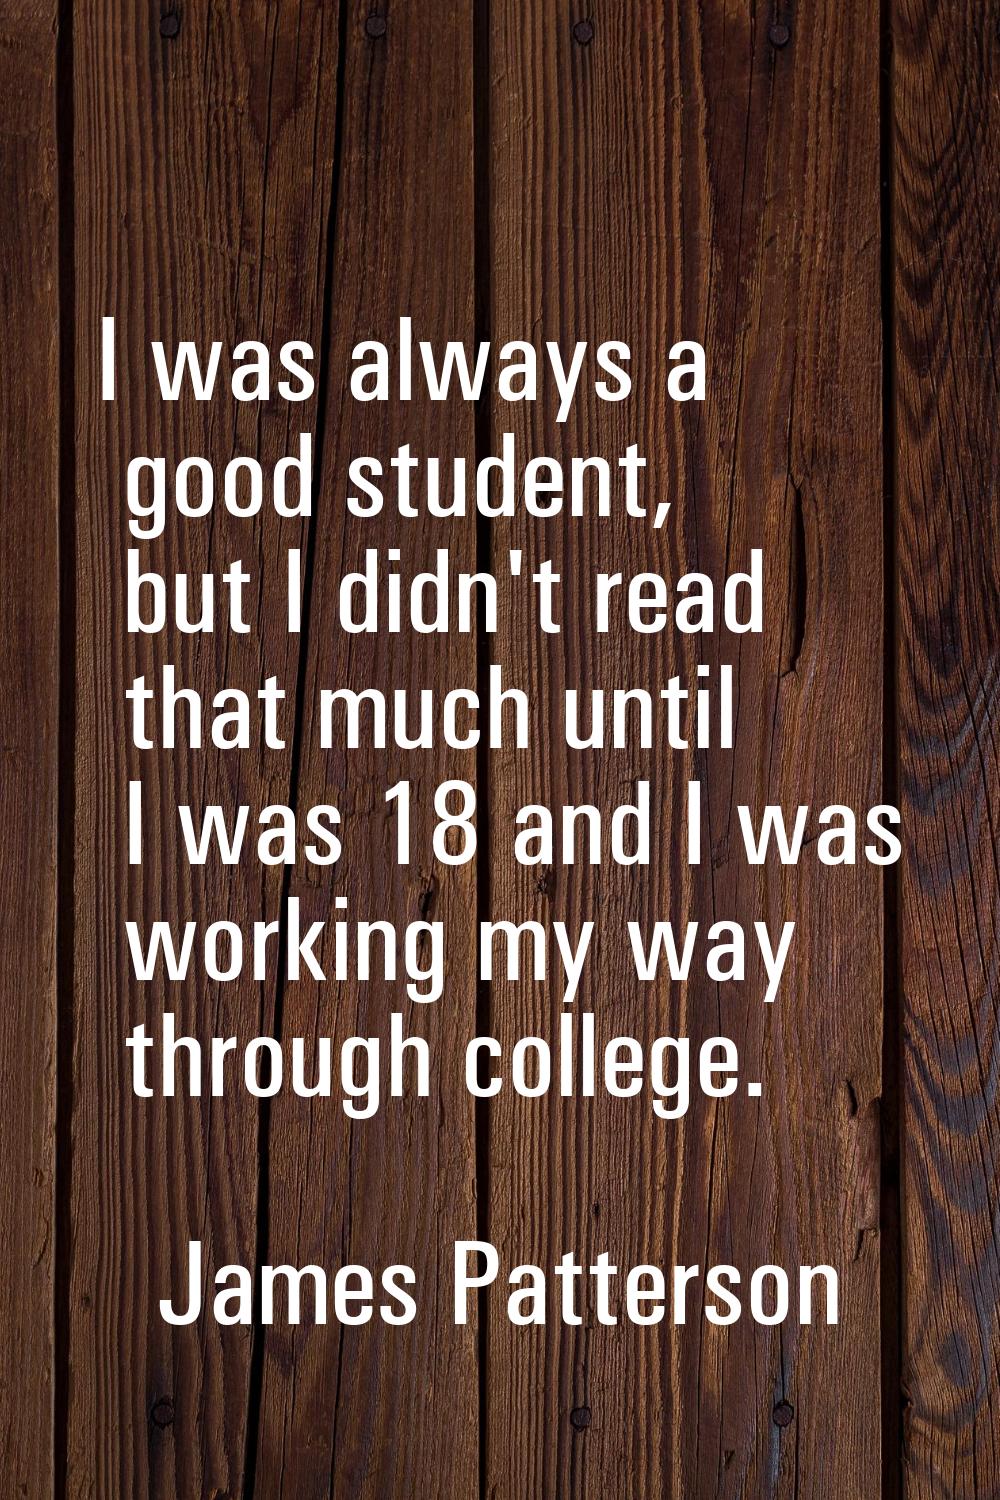 I was always a good student, but I didn't read that much until I was 18 and I was working my way th